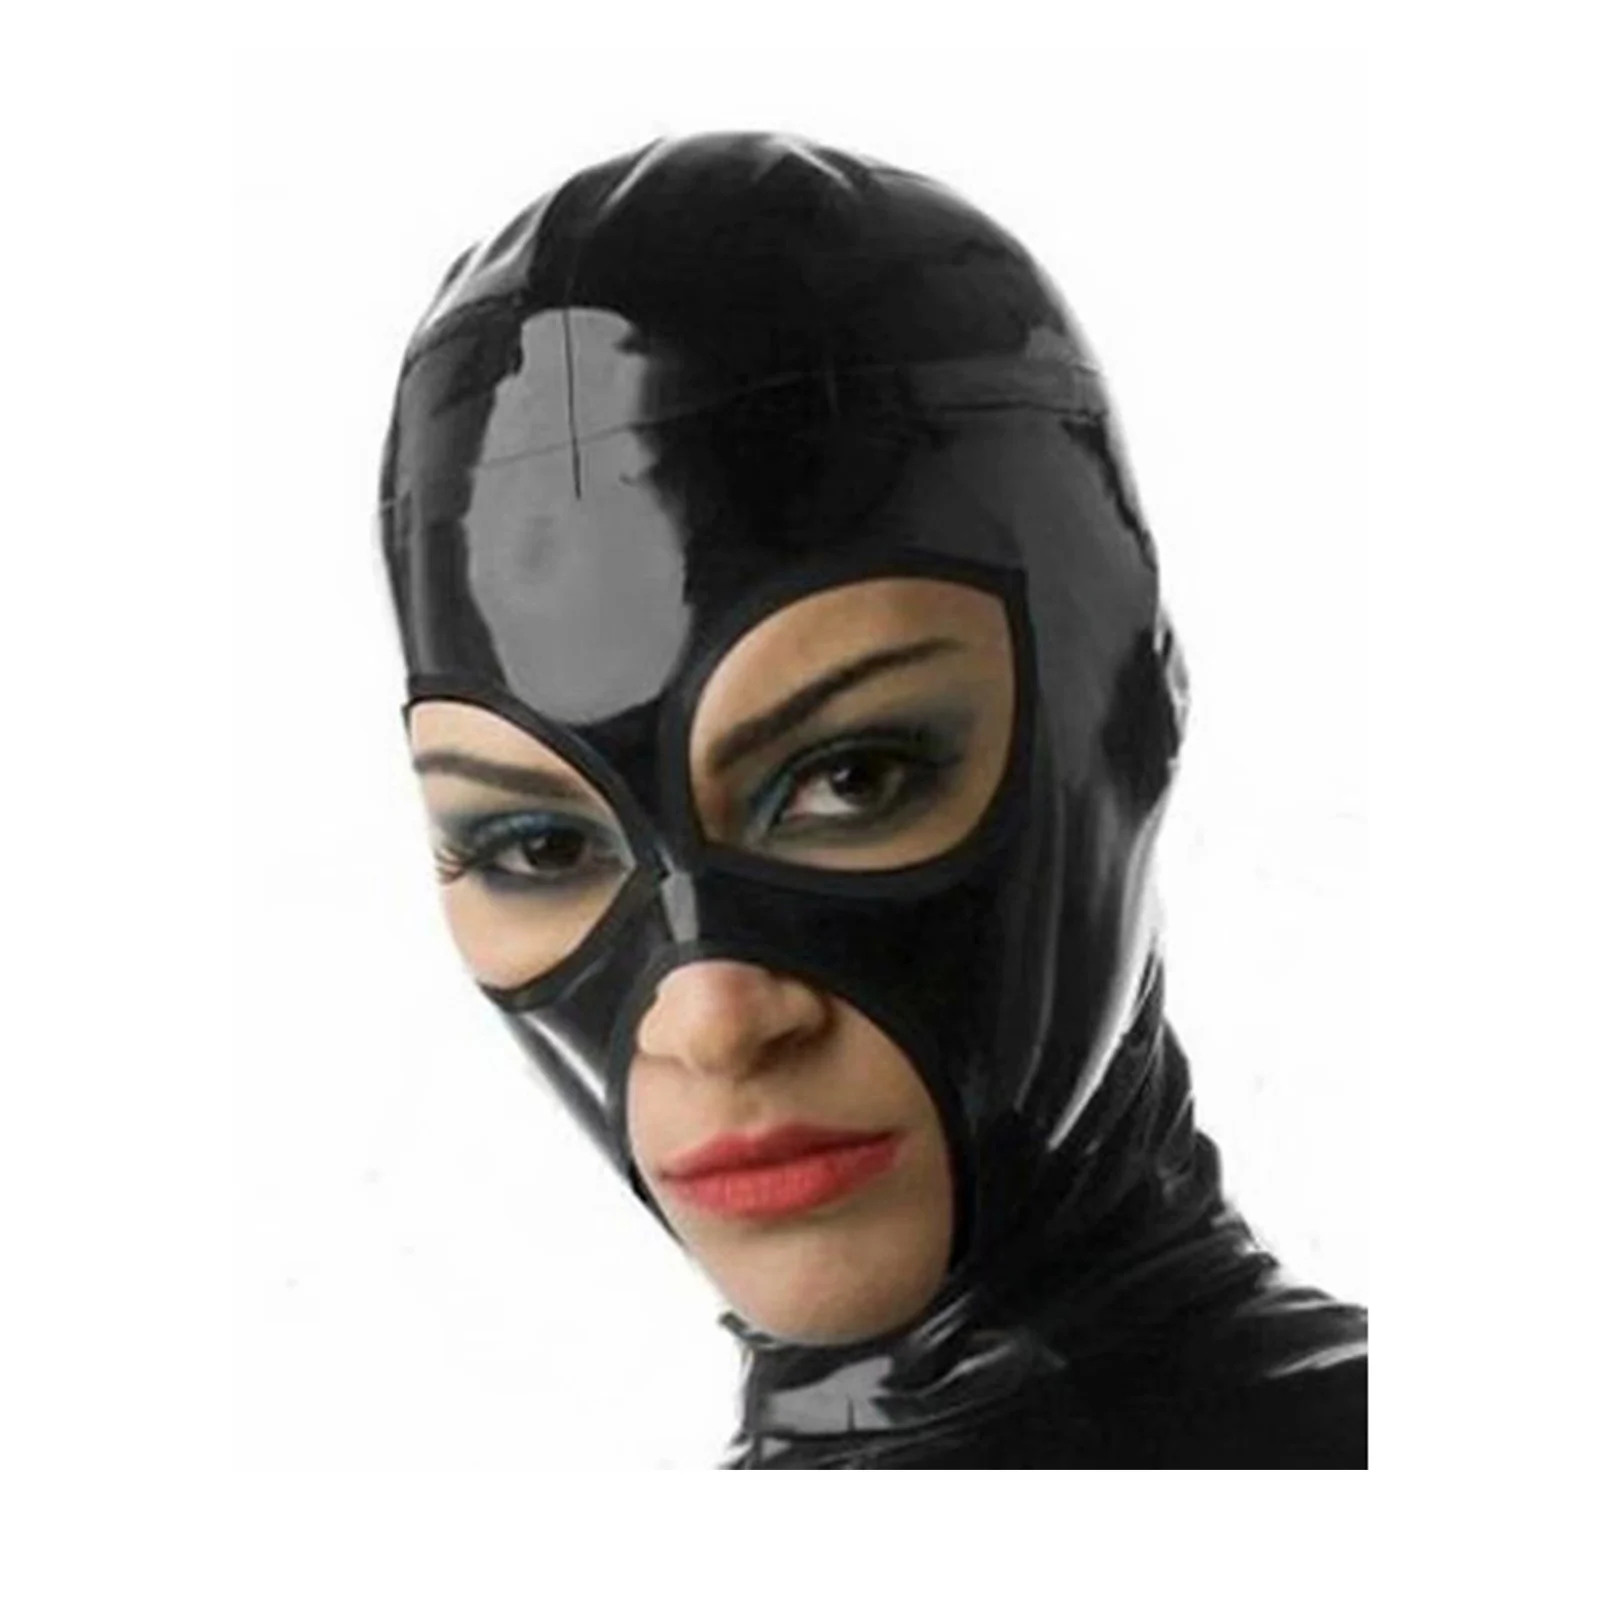 MONNIK Latex Mask Black Rubber Unisex Hood Open Eyes and Mouth Handmade for Latex Fetish Party Catsuit Halloween Clubwear